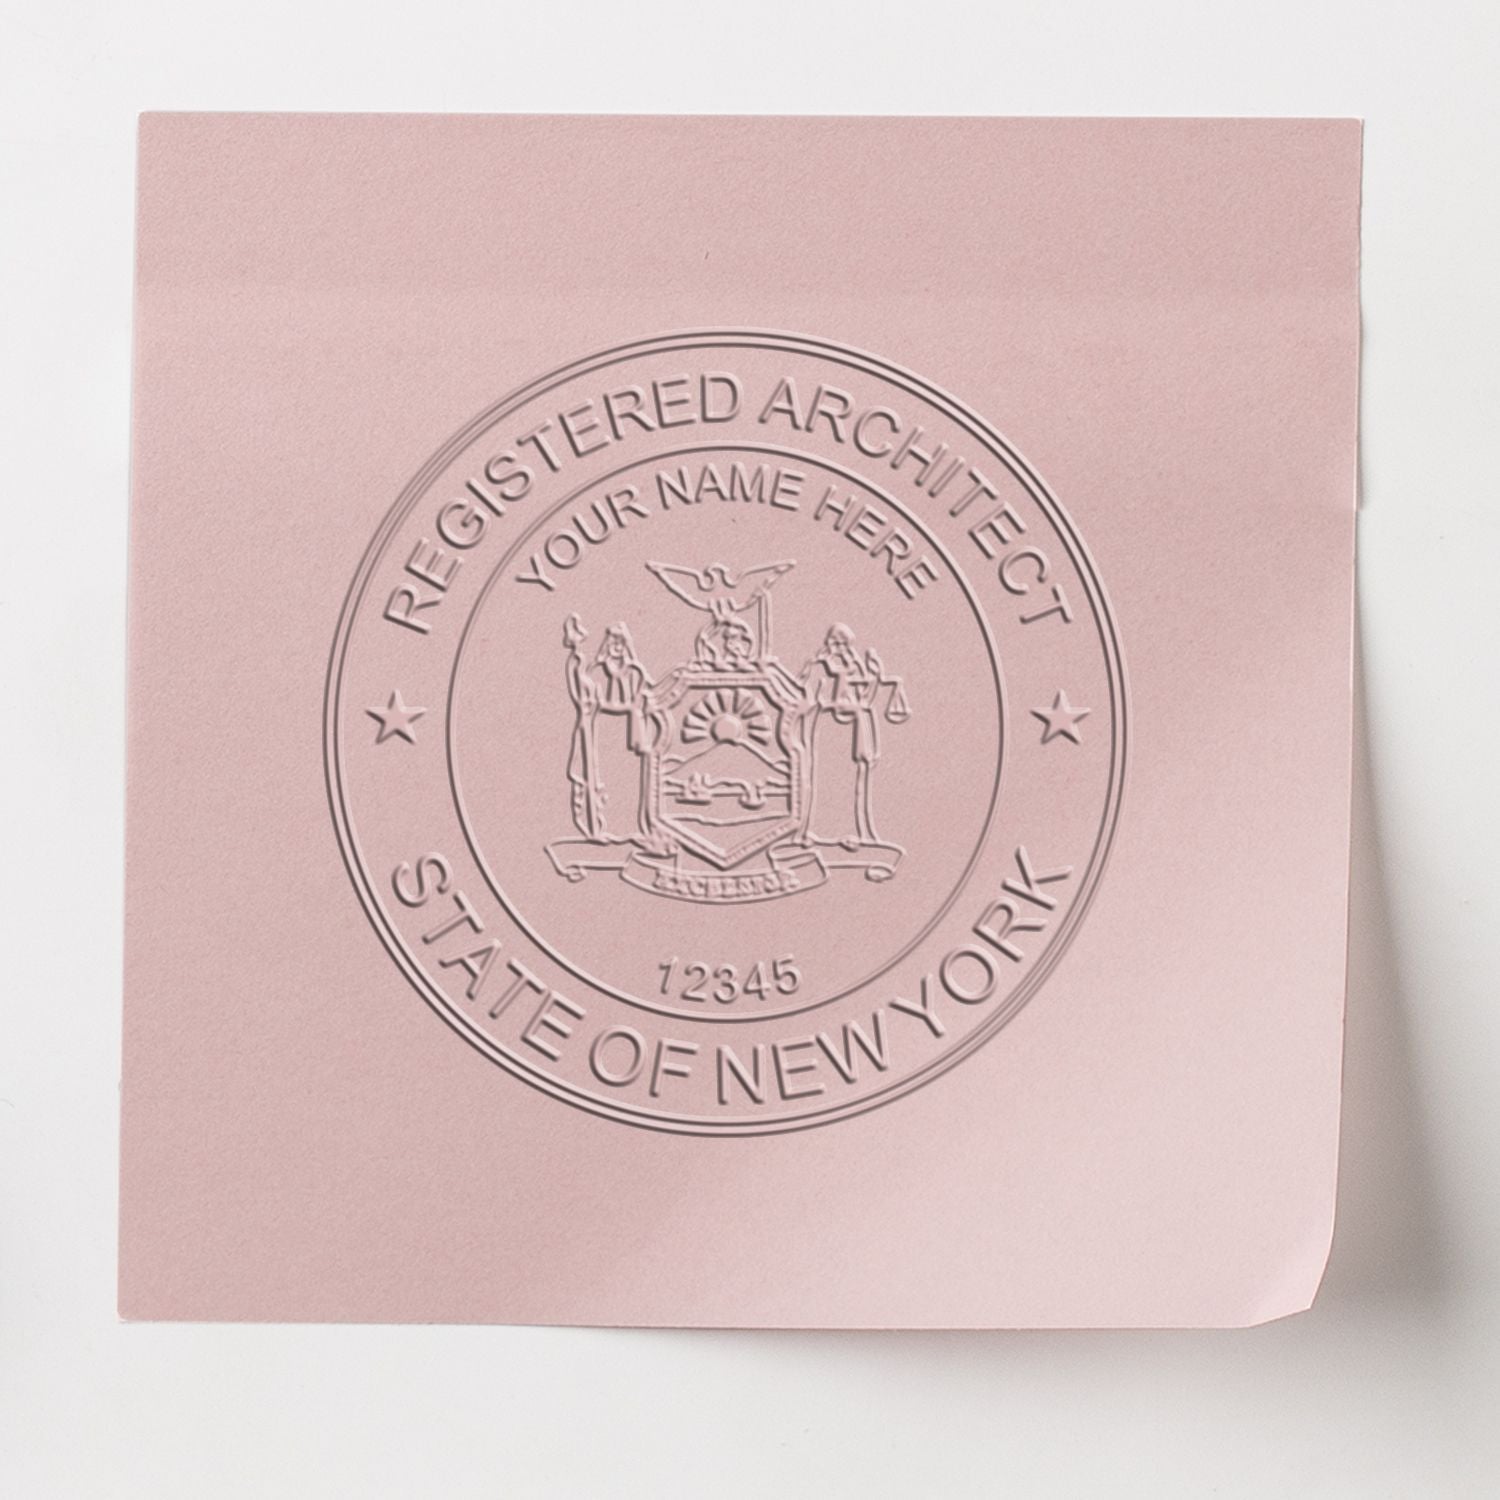 An alternative view of the Hybrid New York Architect Seal stamped on a sheet of paper showing the image in use